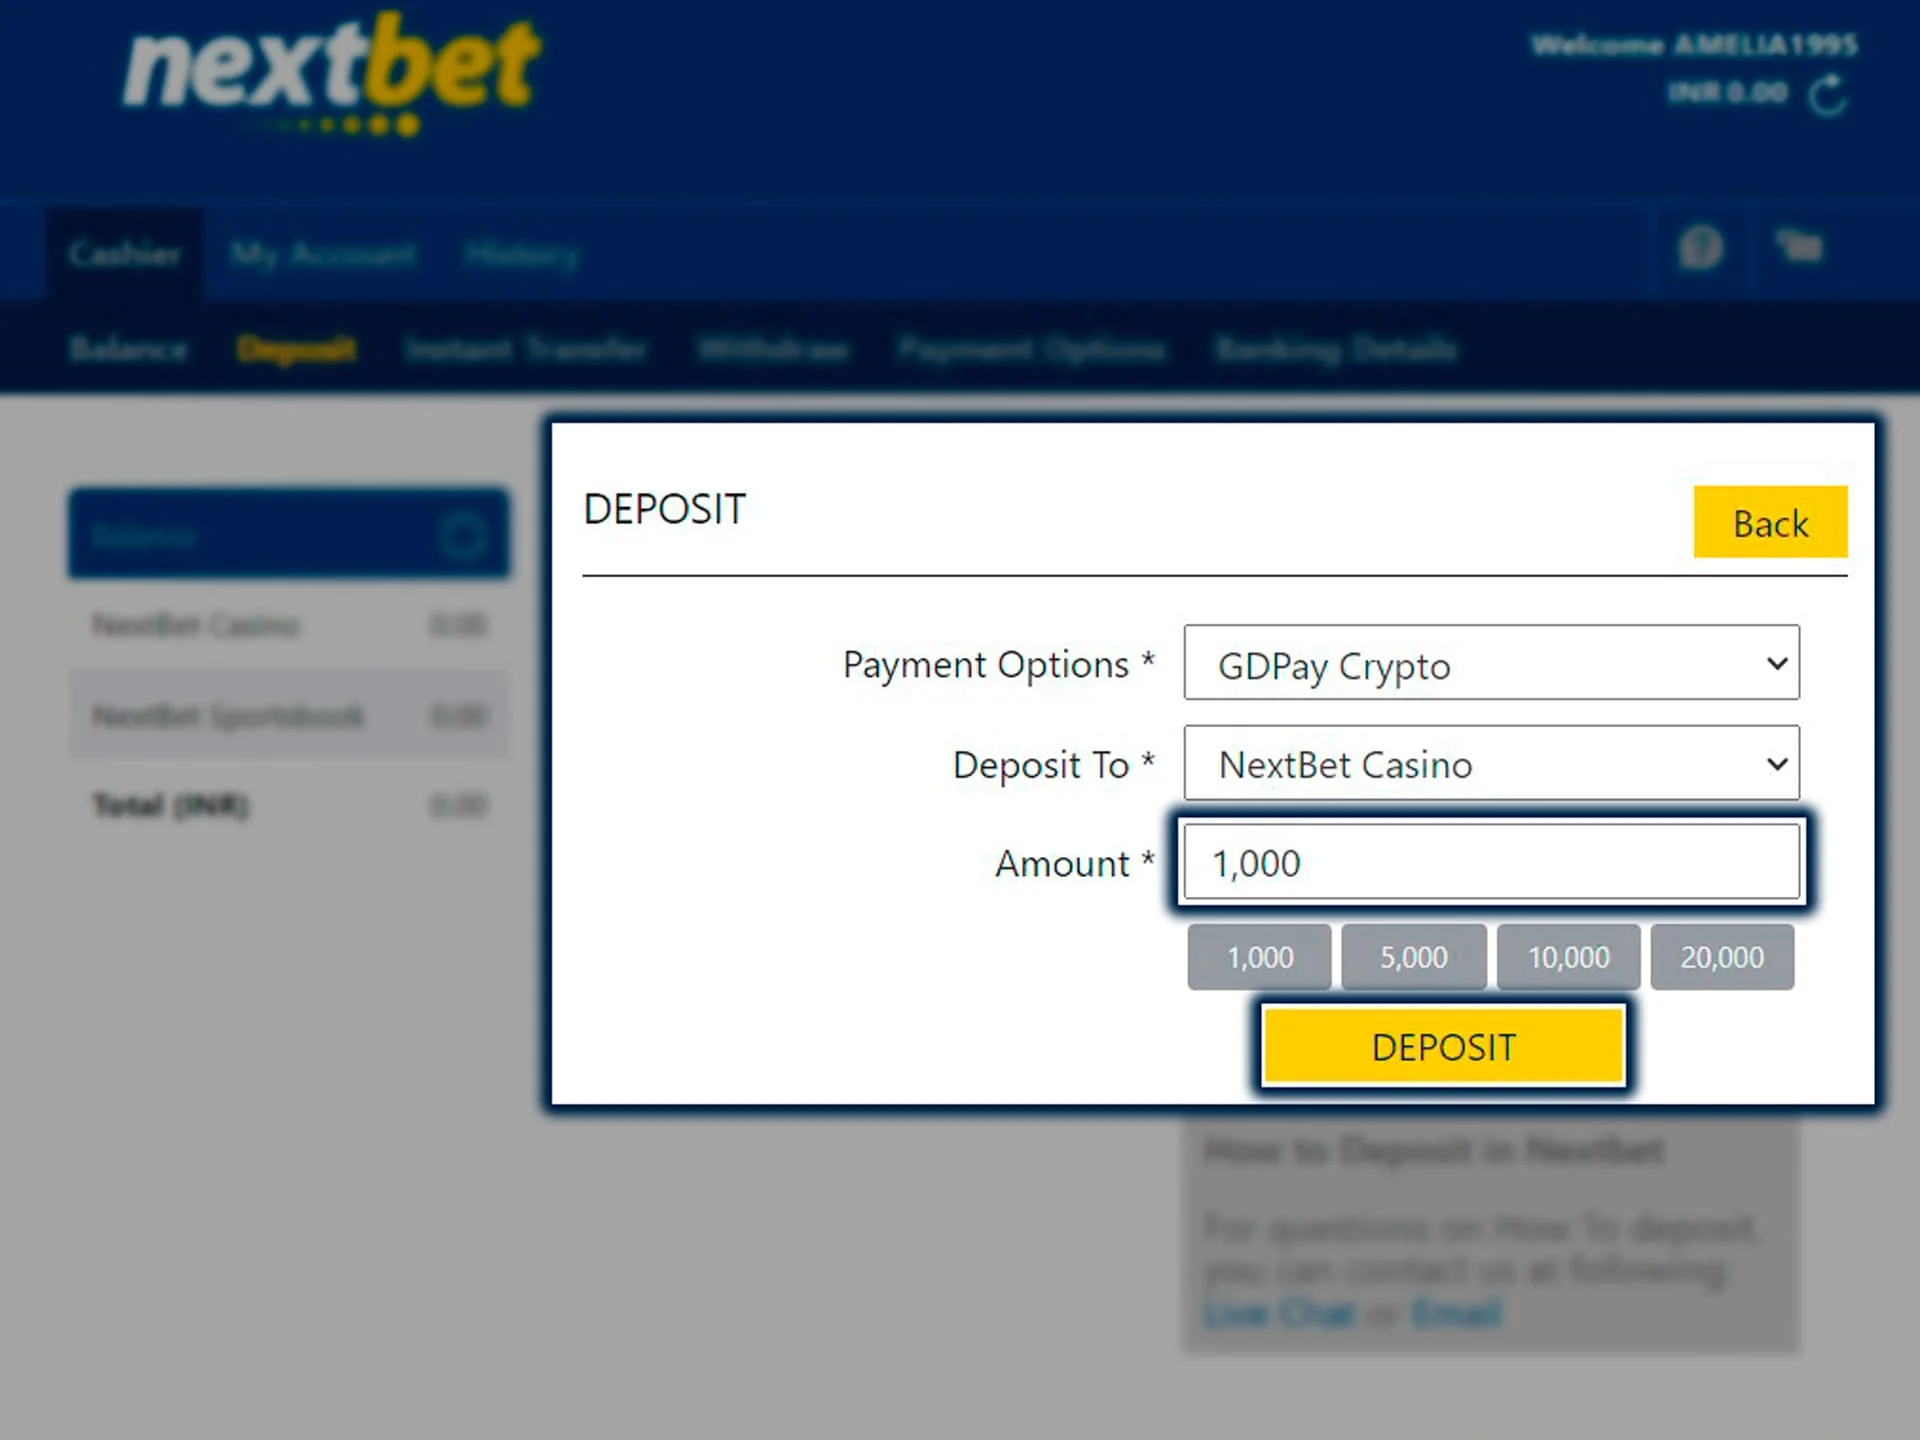 Specify the deposit amount and confirm the transaction on Nextbet.